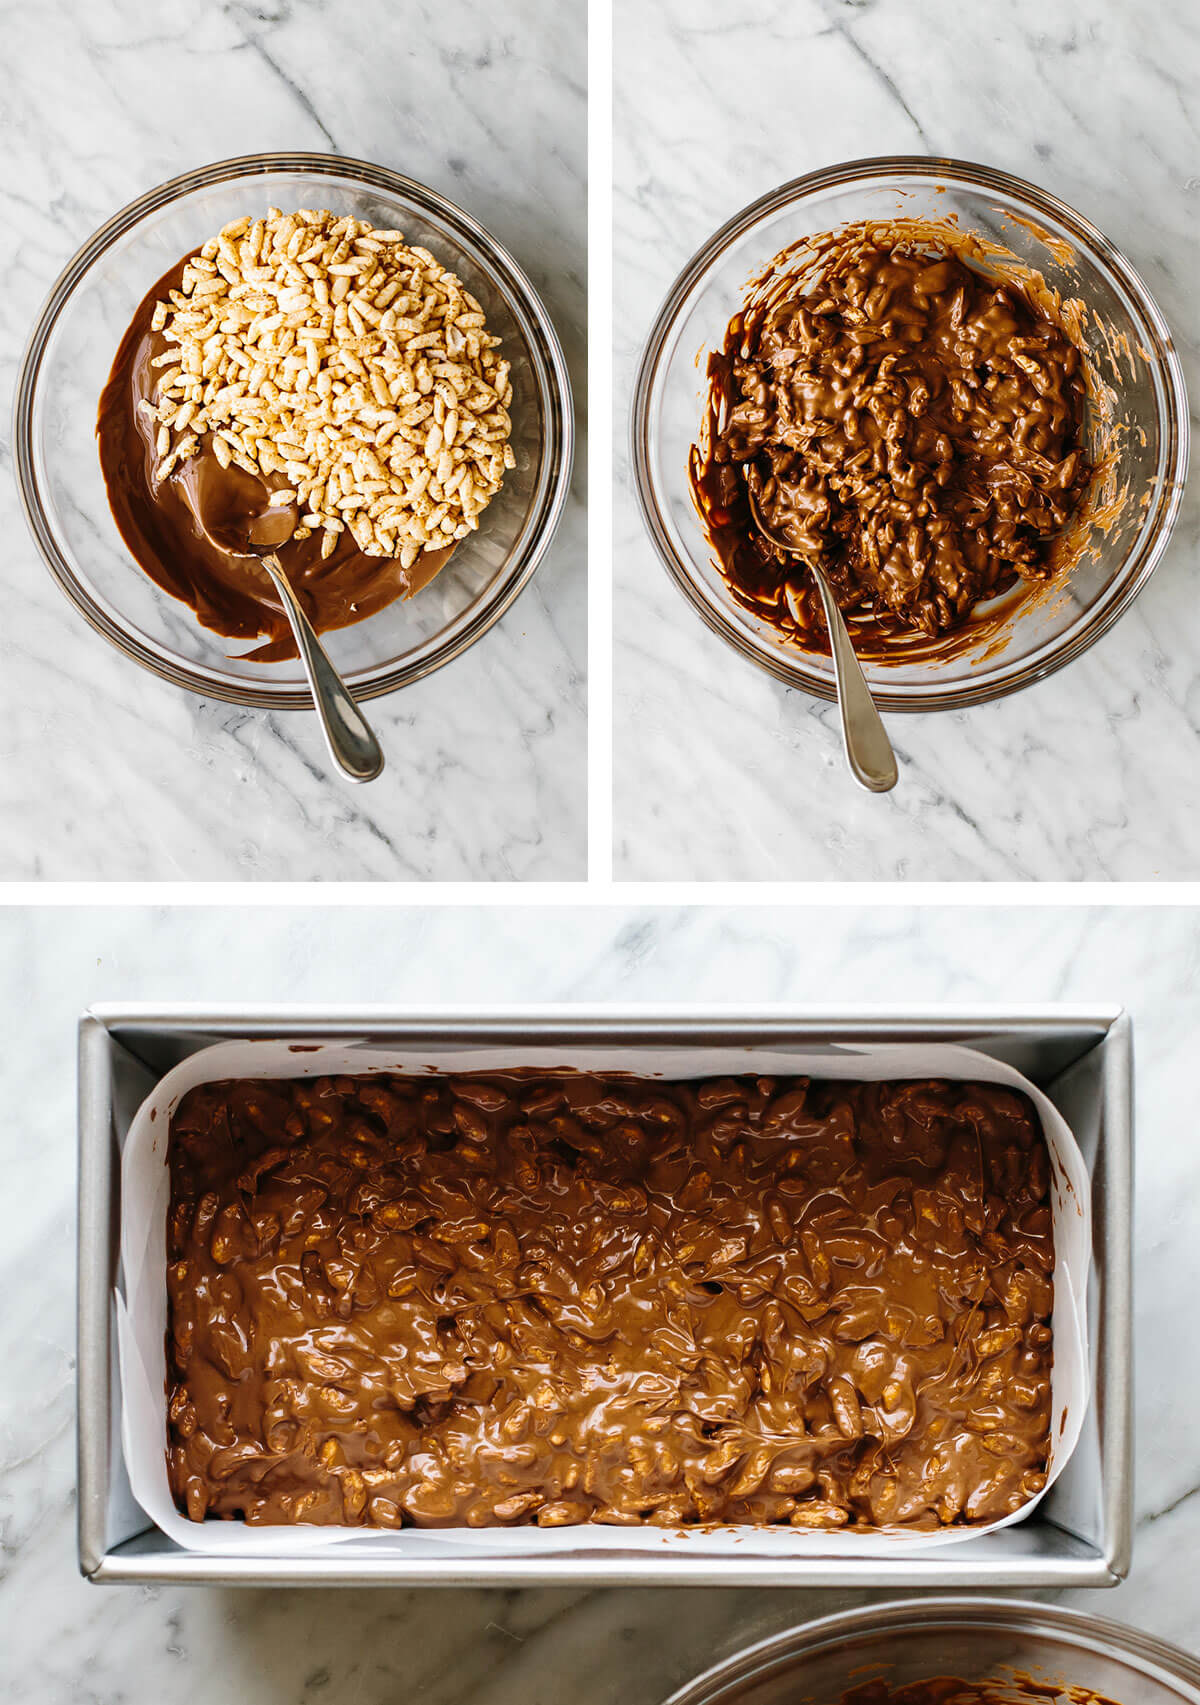 Stirring chocolate crunch bar ingredients and pouring into a loaf pan.